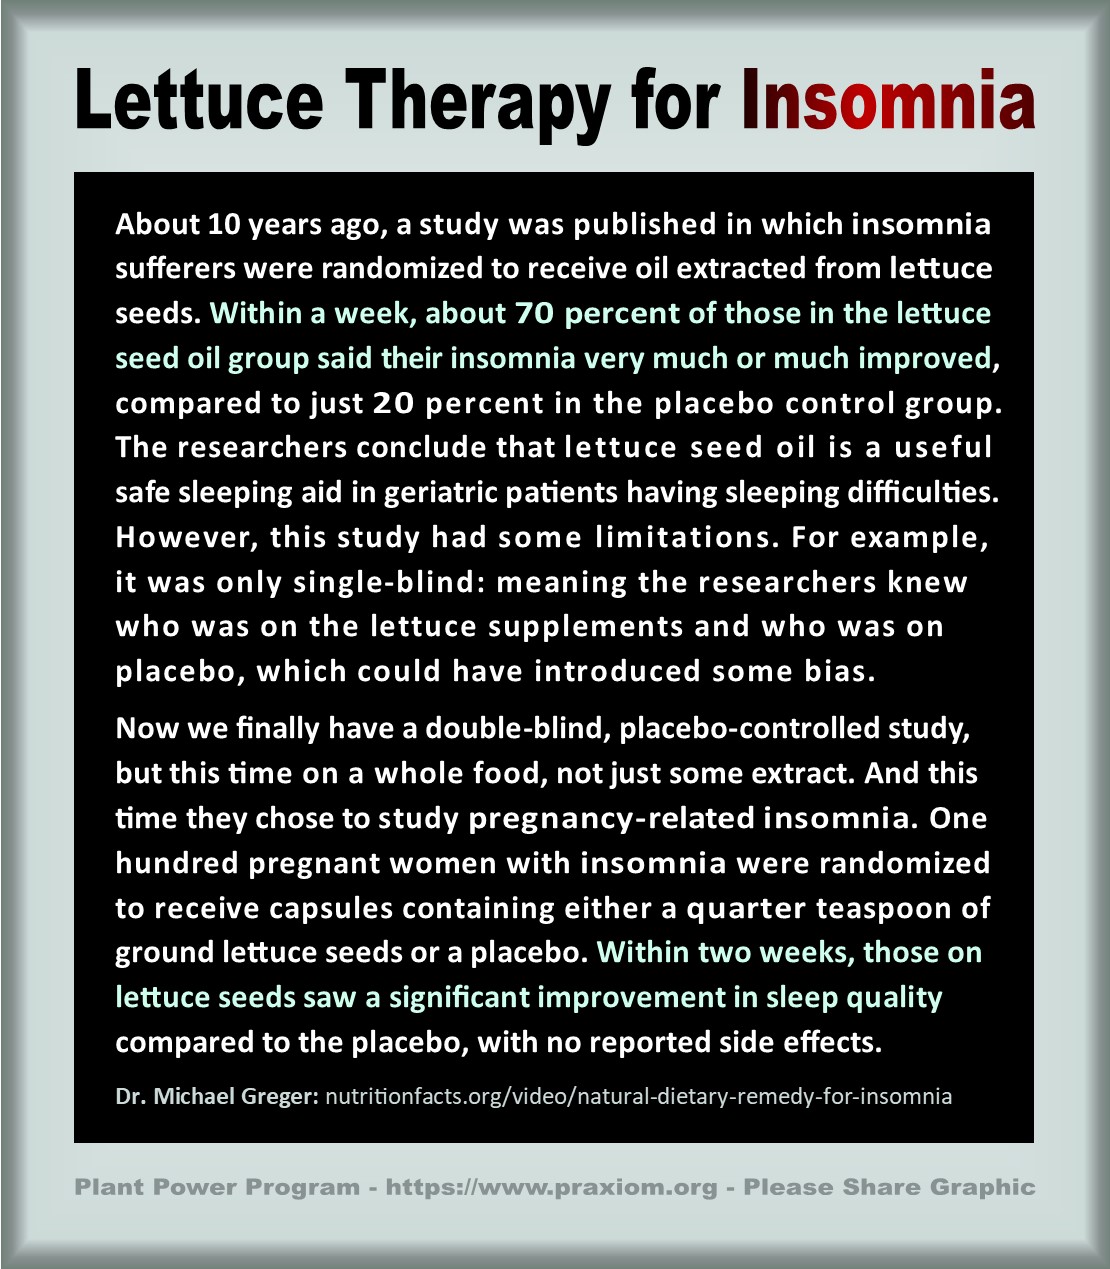 Lettuce Therapy for Insomnia - Dr. Michael Greger